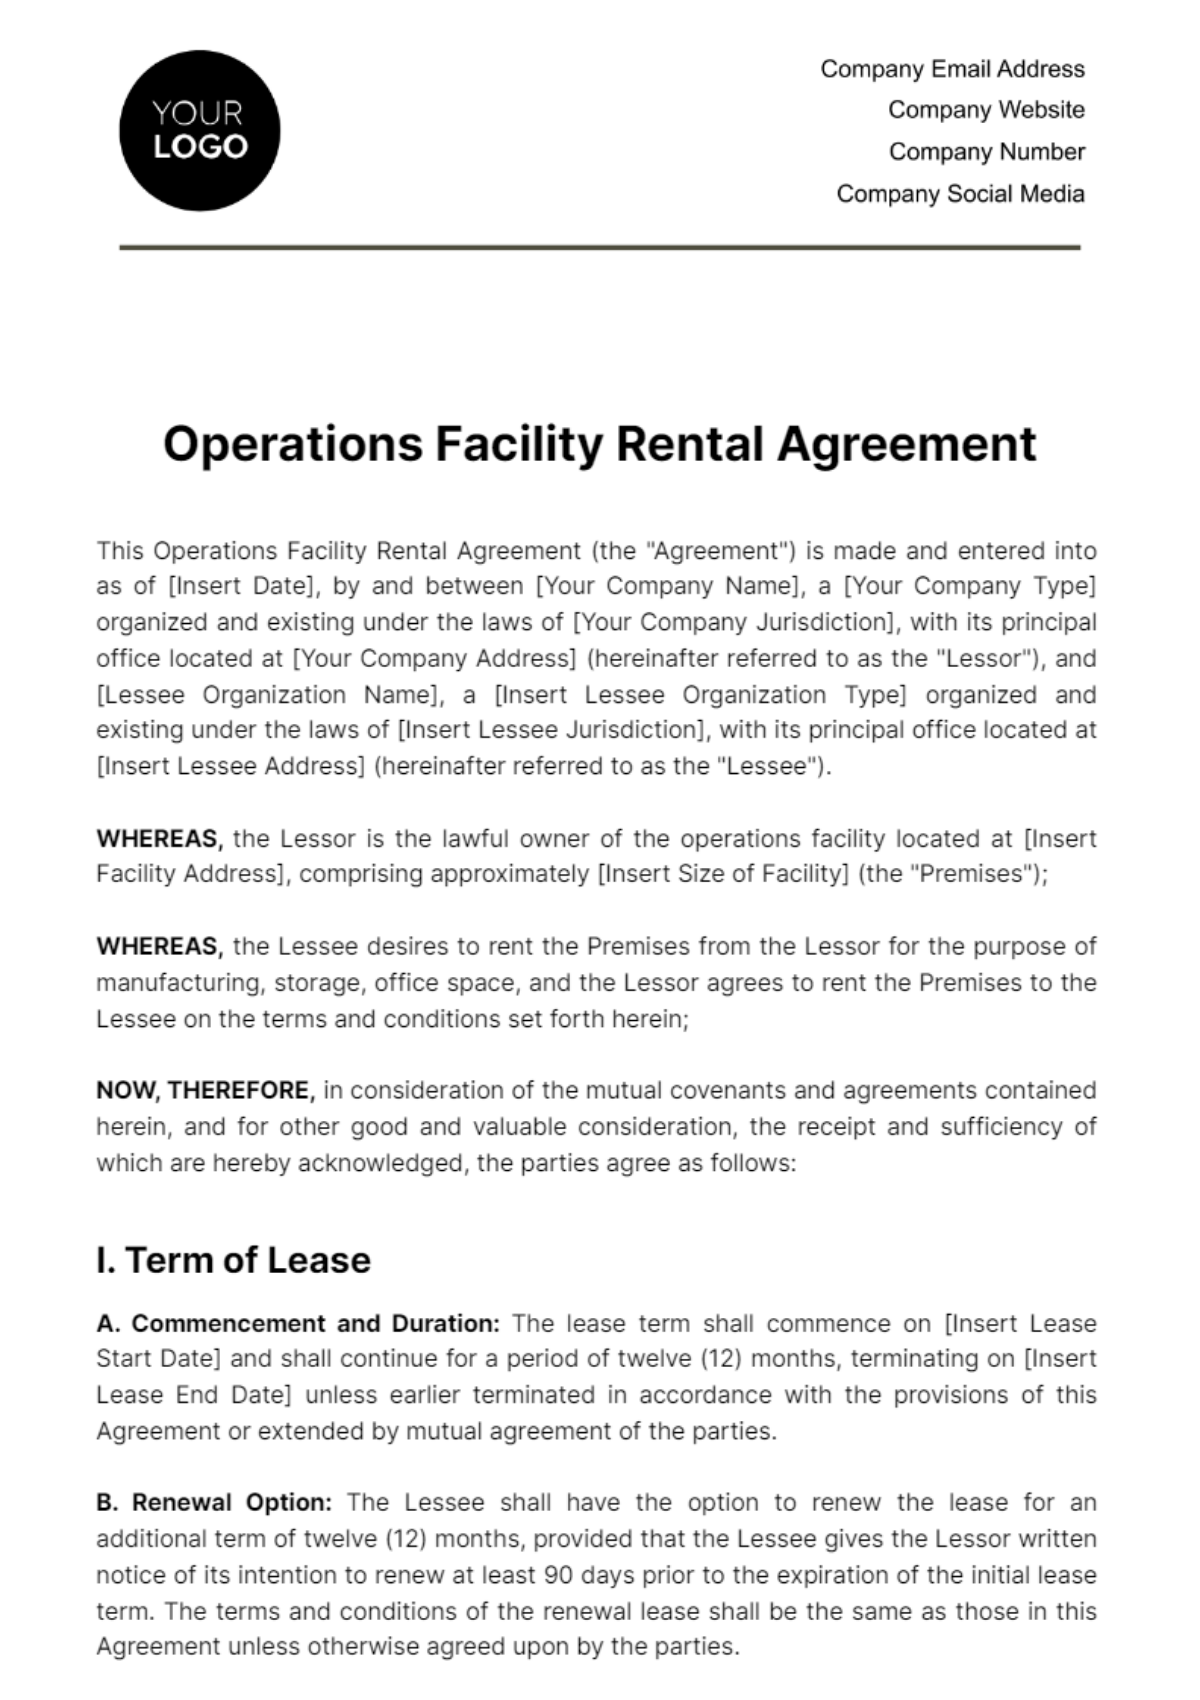 Operations Facility Rental Agreement Template